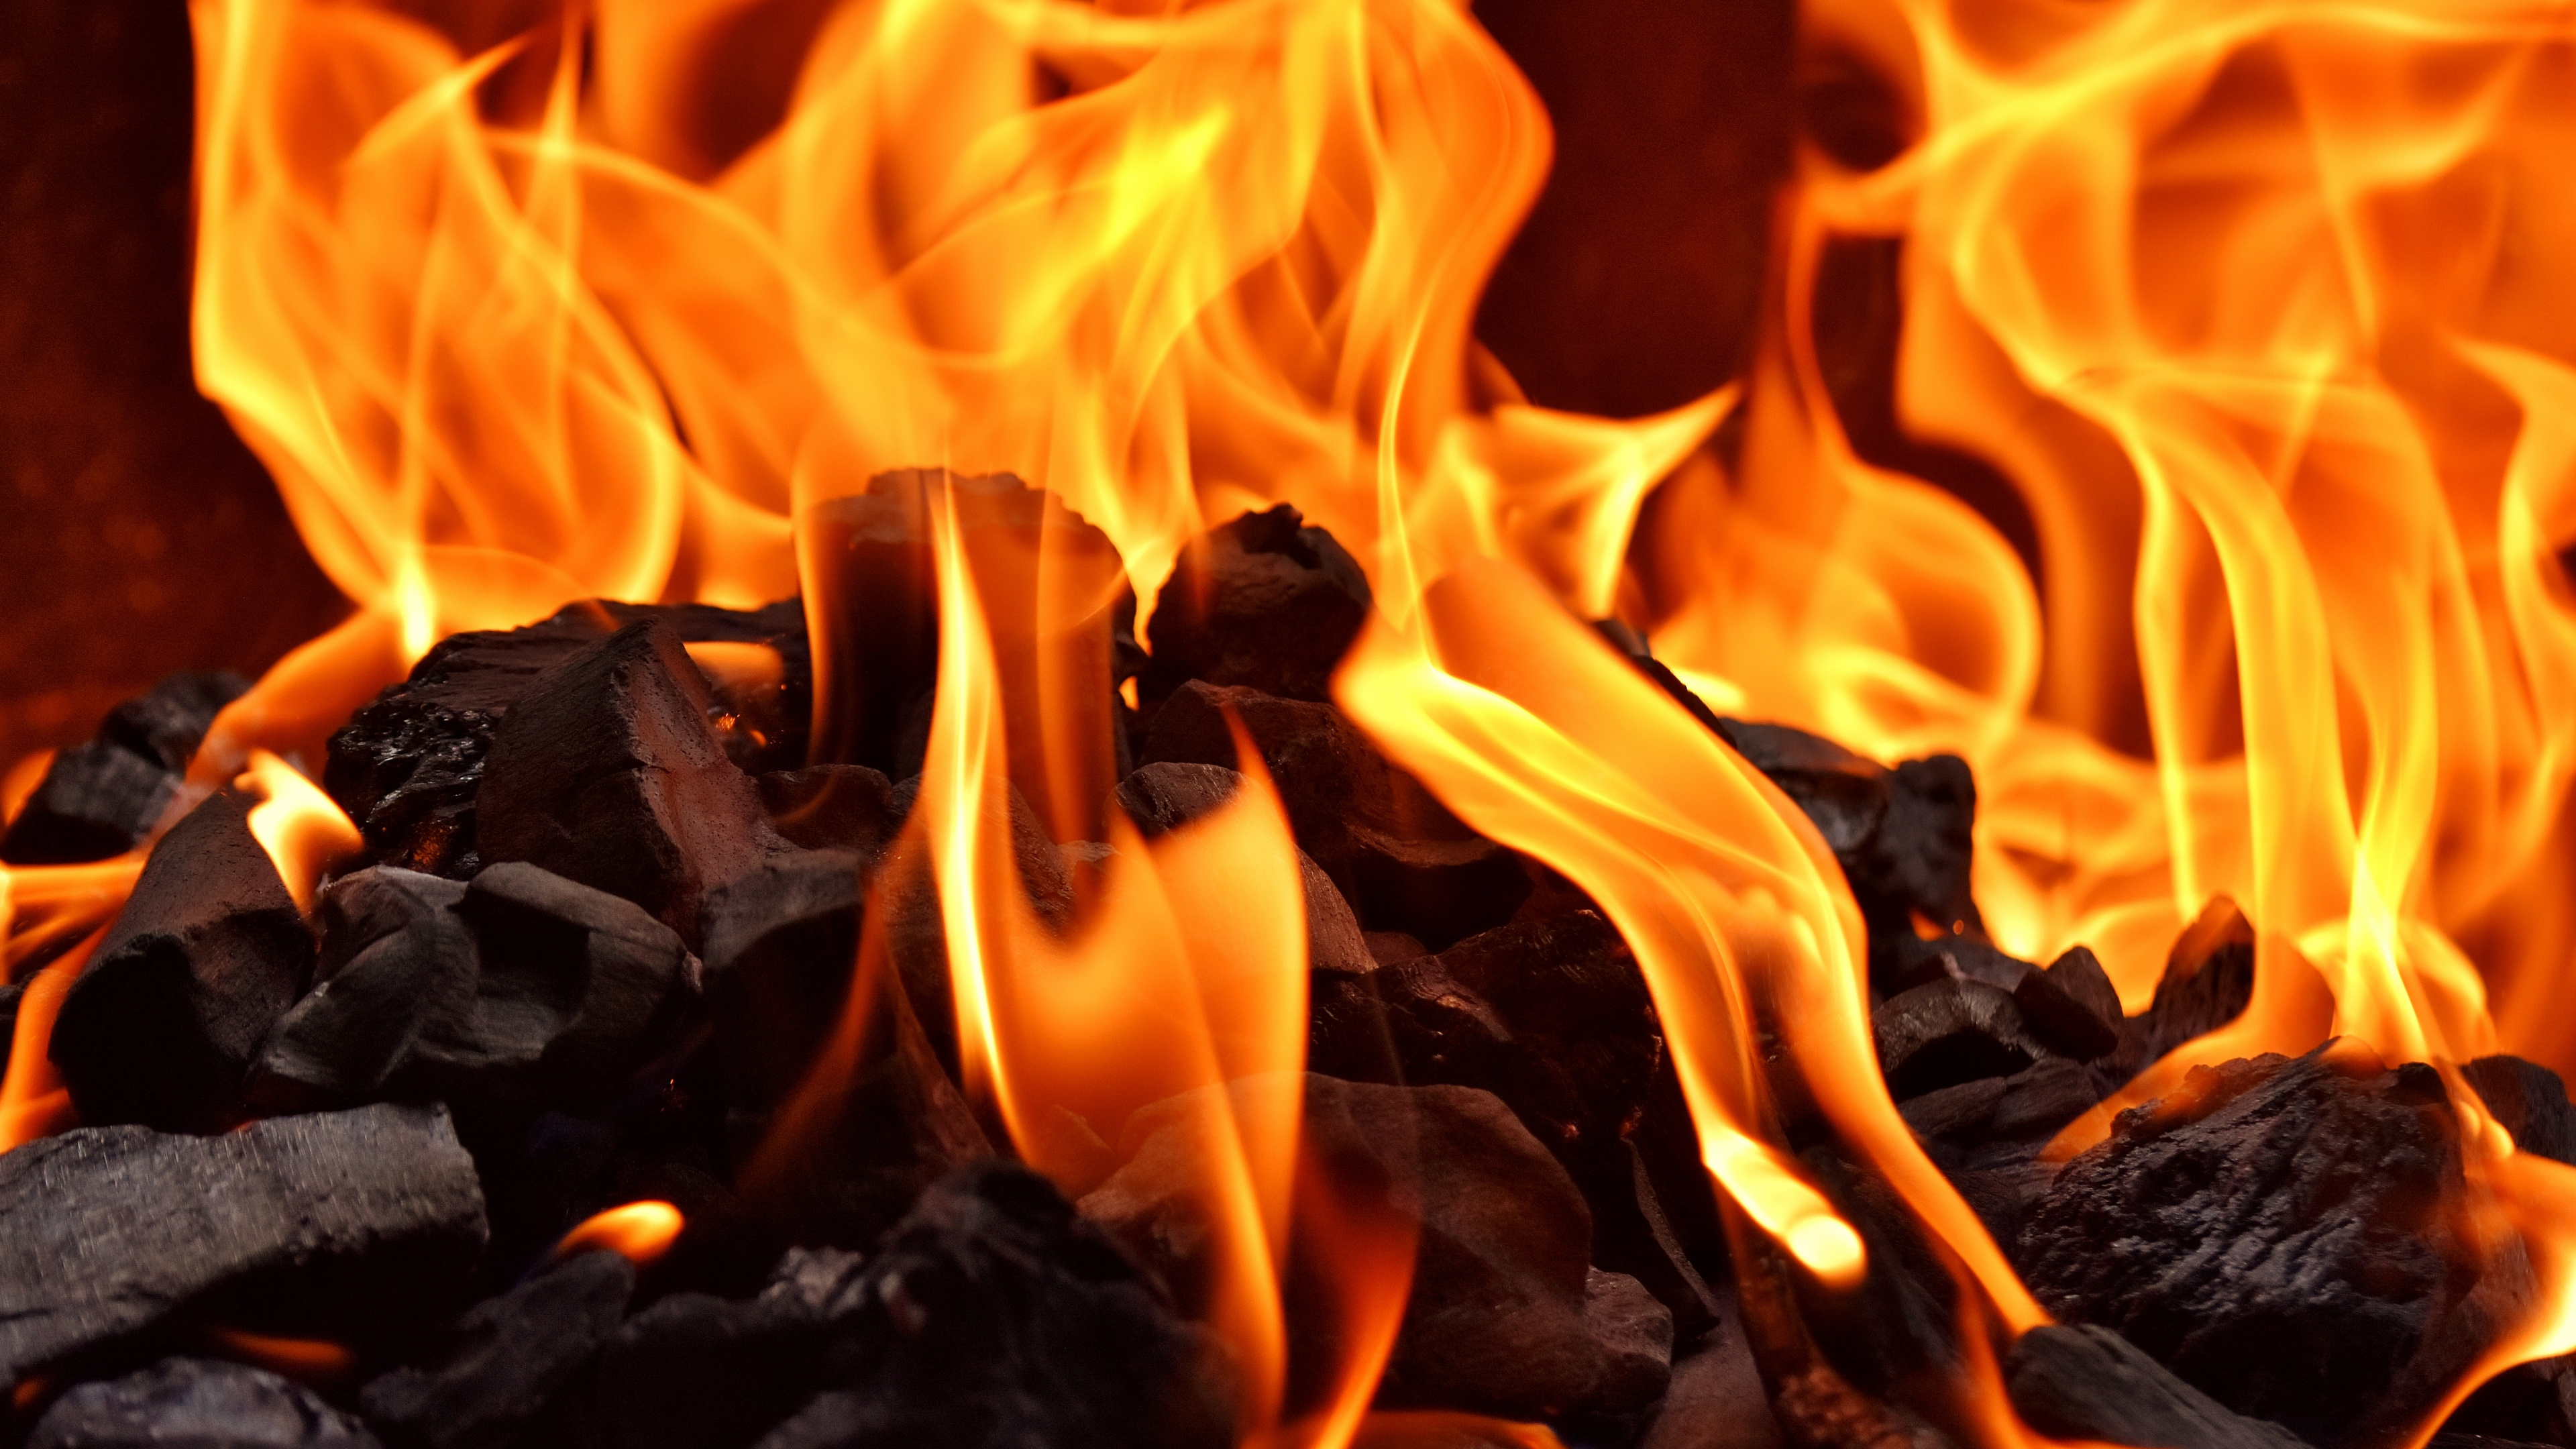 Burning Fire on Black Textile. Wallpaper in 3840x2160 Resolution